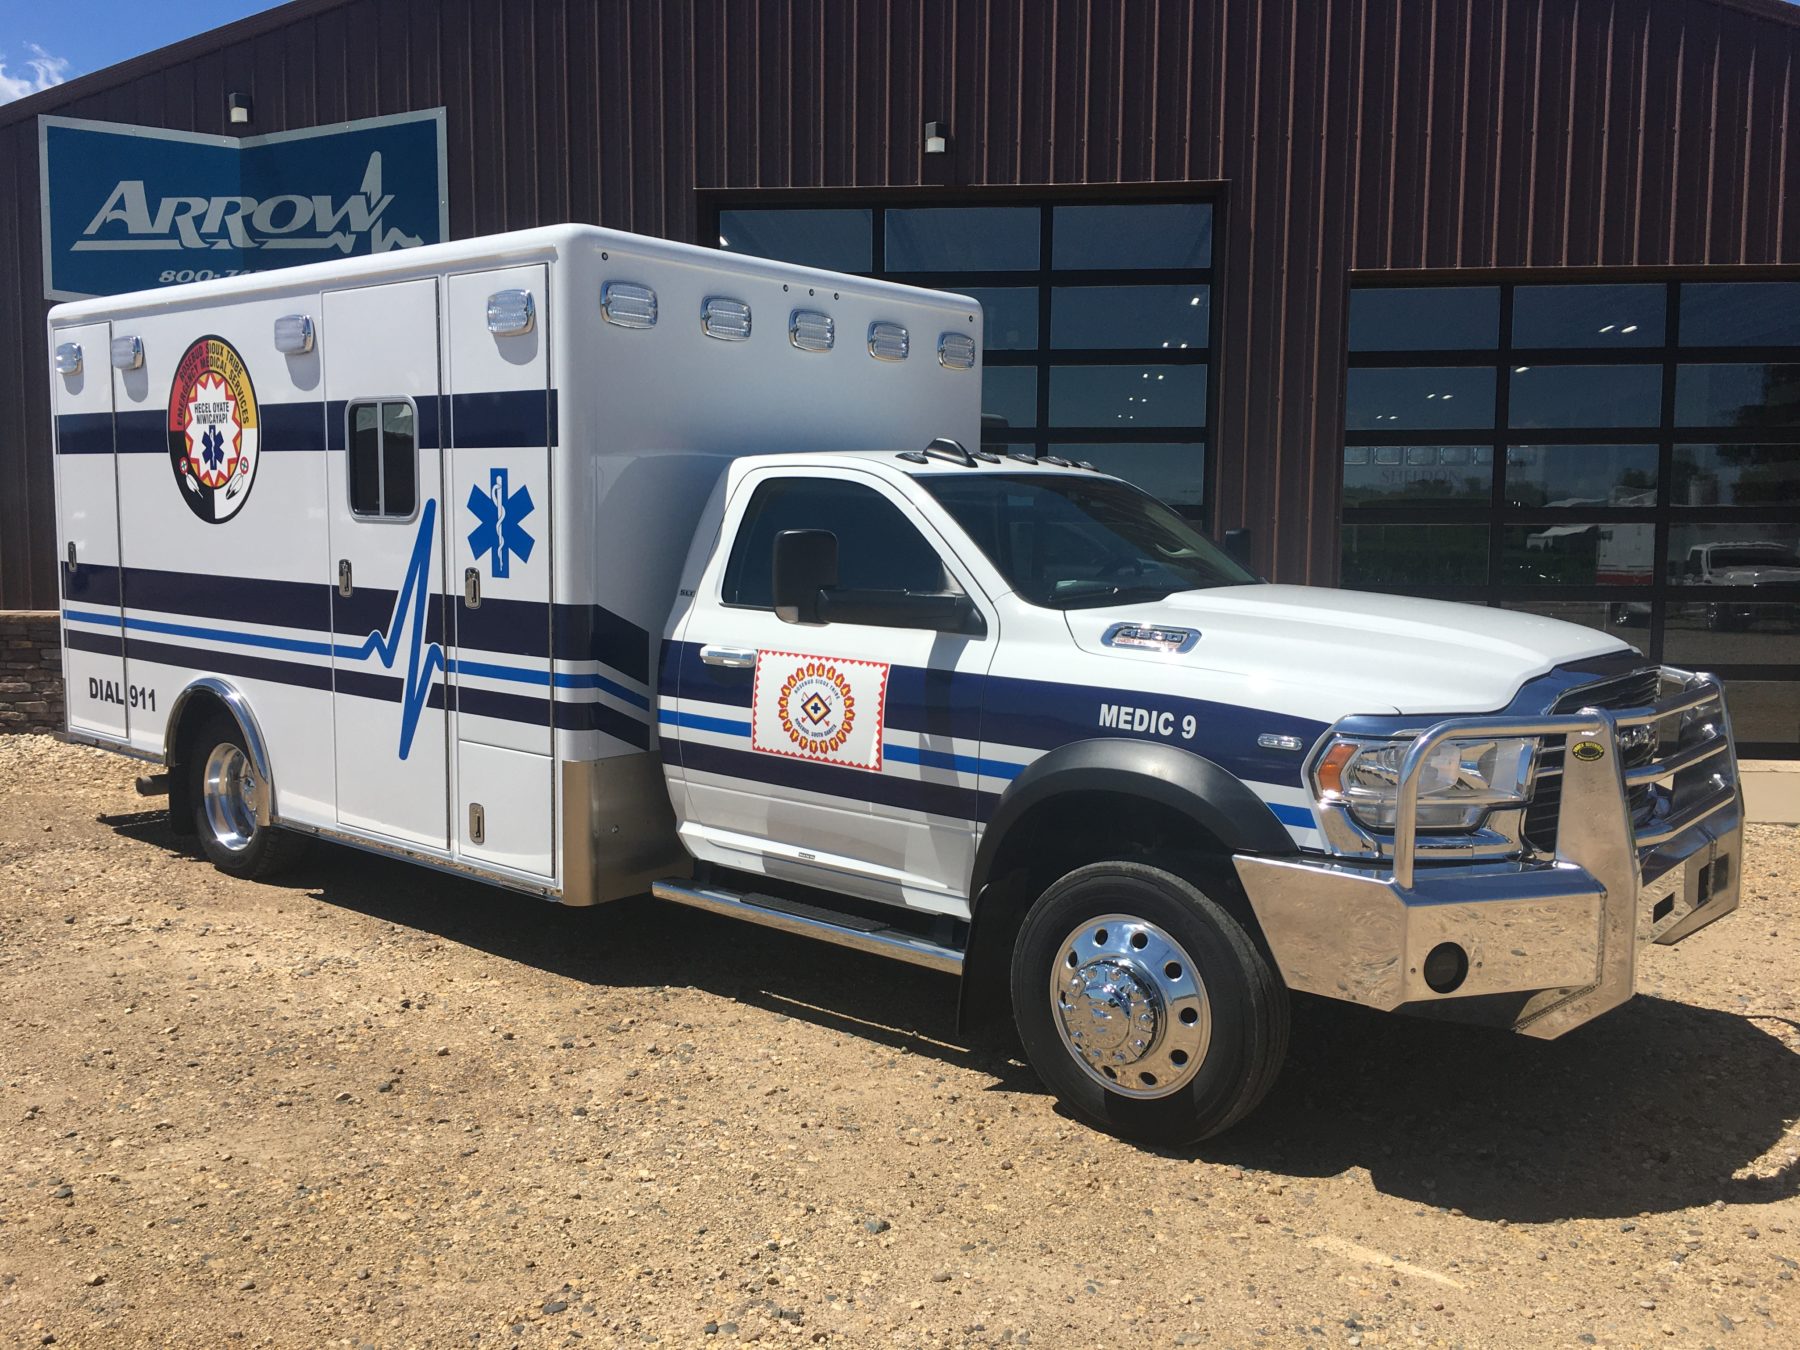 2019 Ram 4500 4x4 Heavy Duty Ambulance For Sale – Picture 3